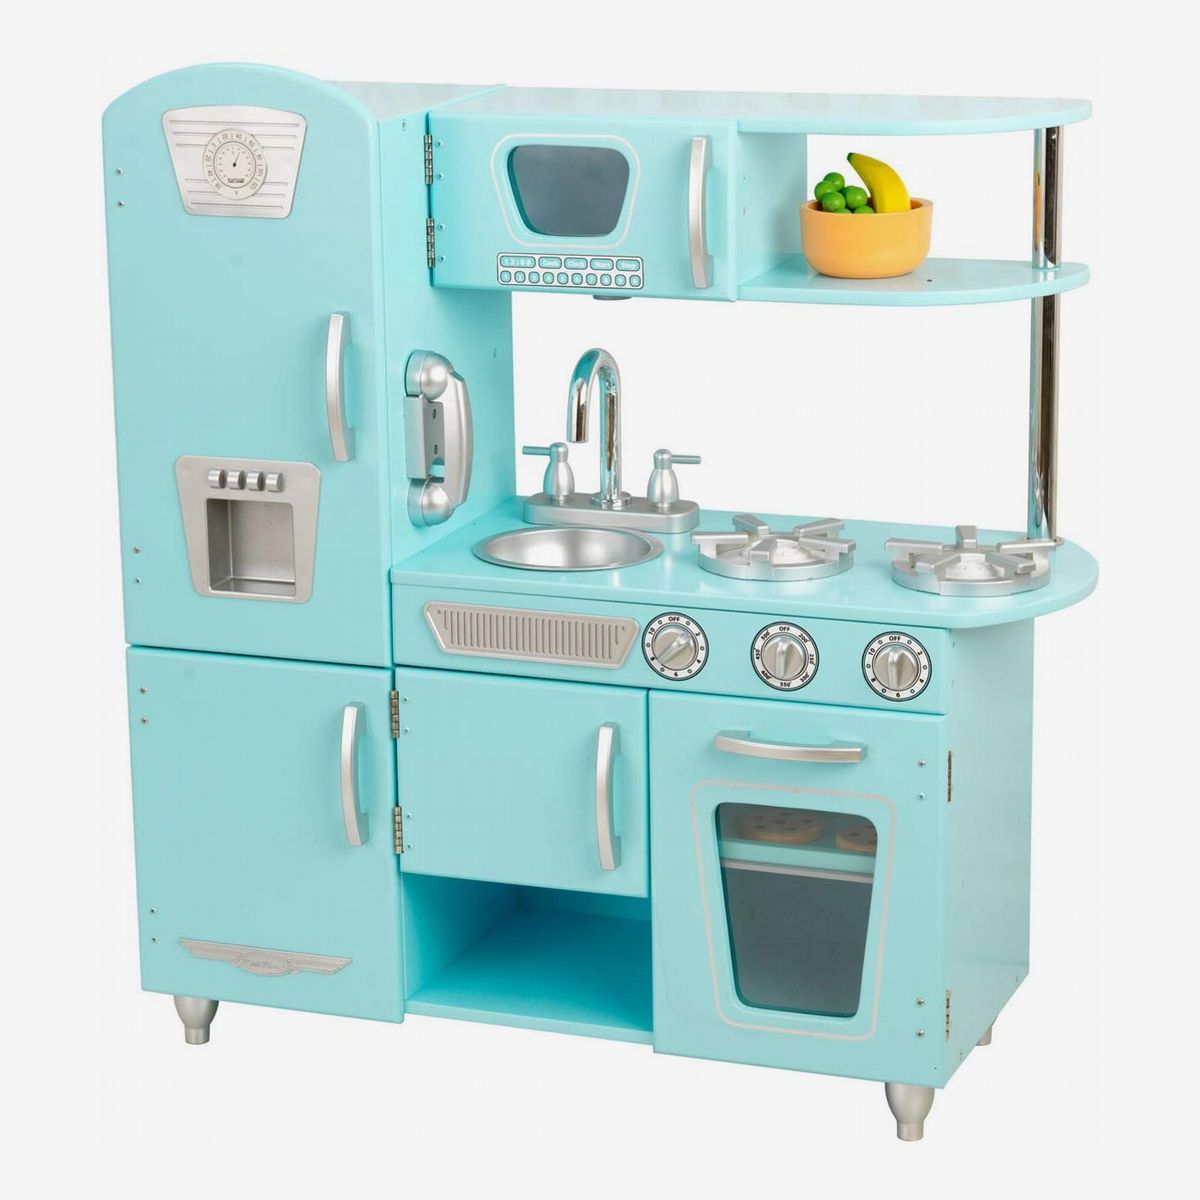 kitchen for 18 month old